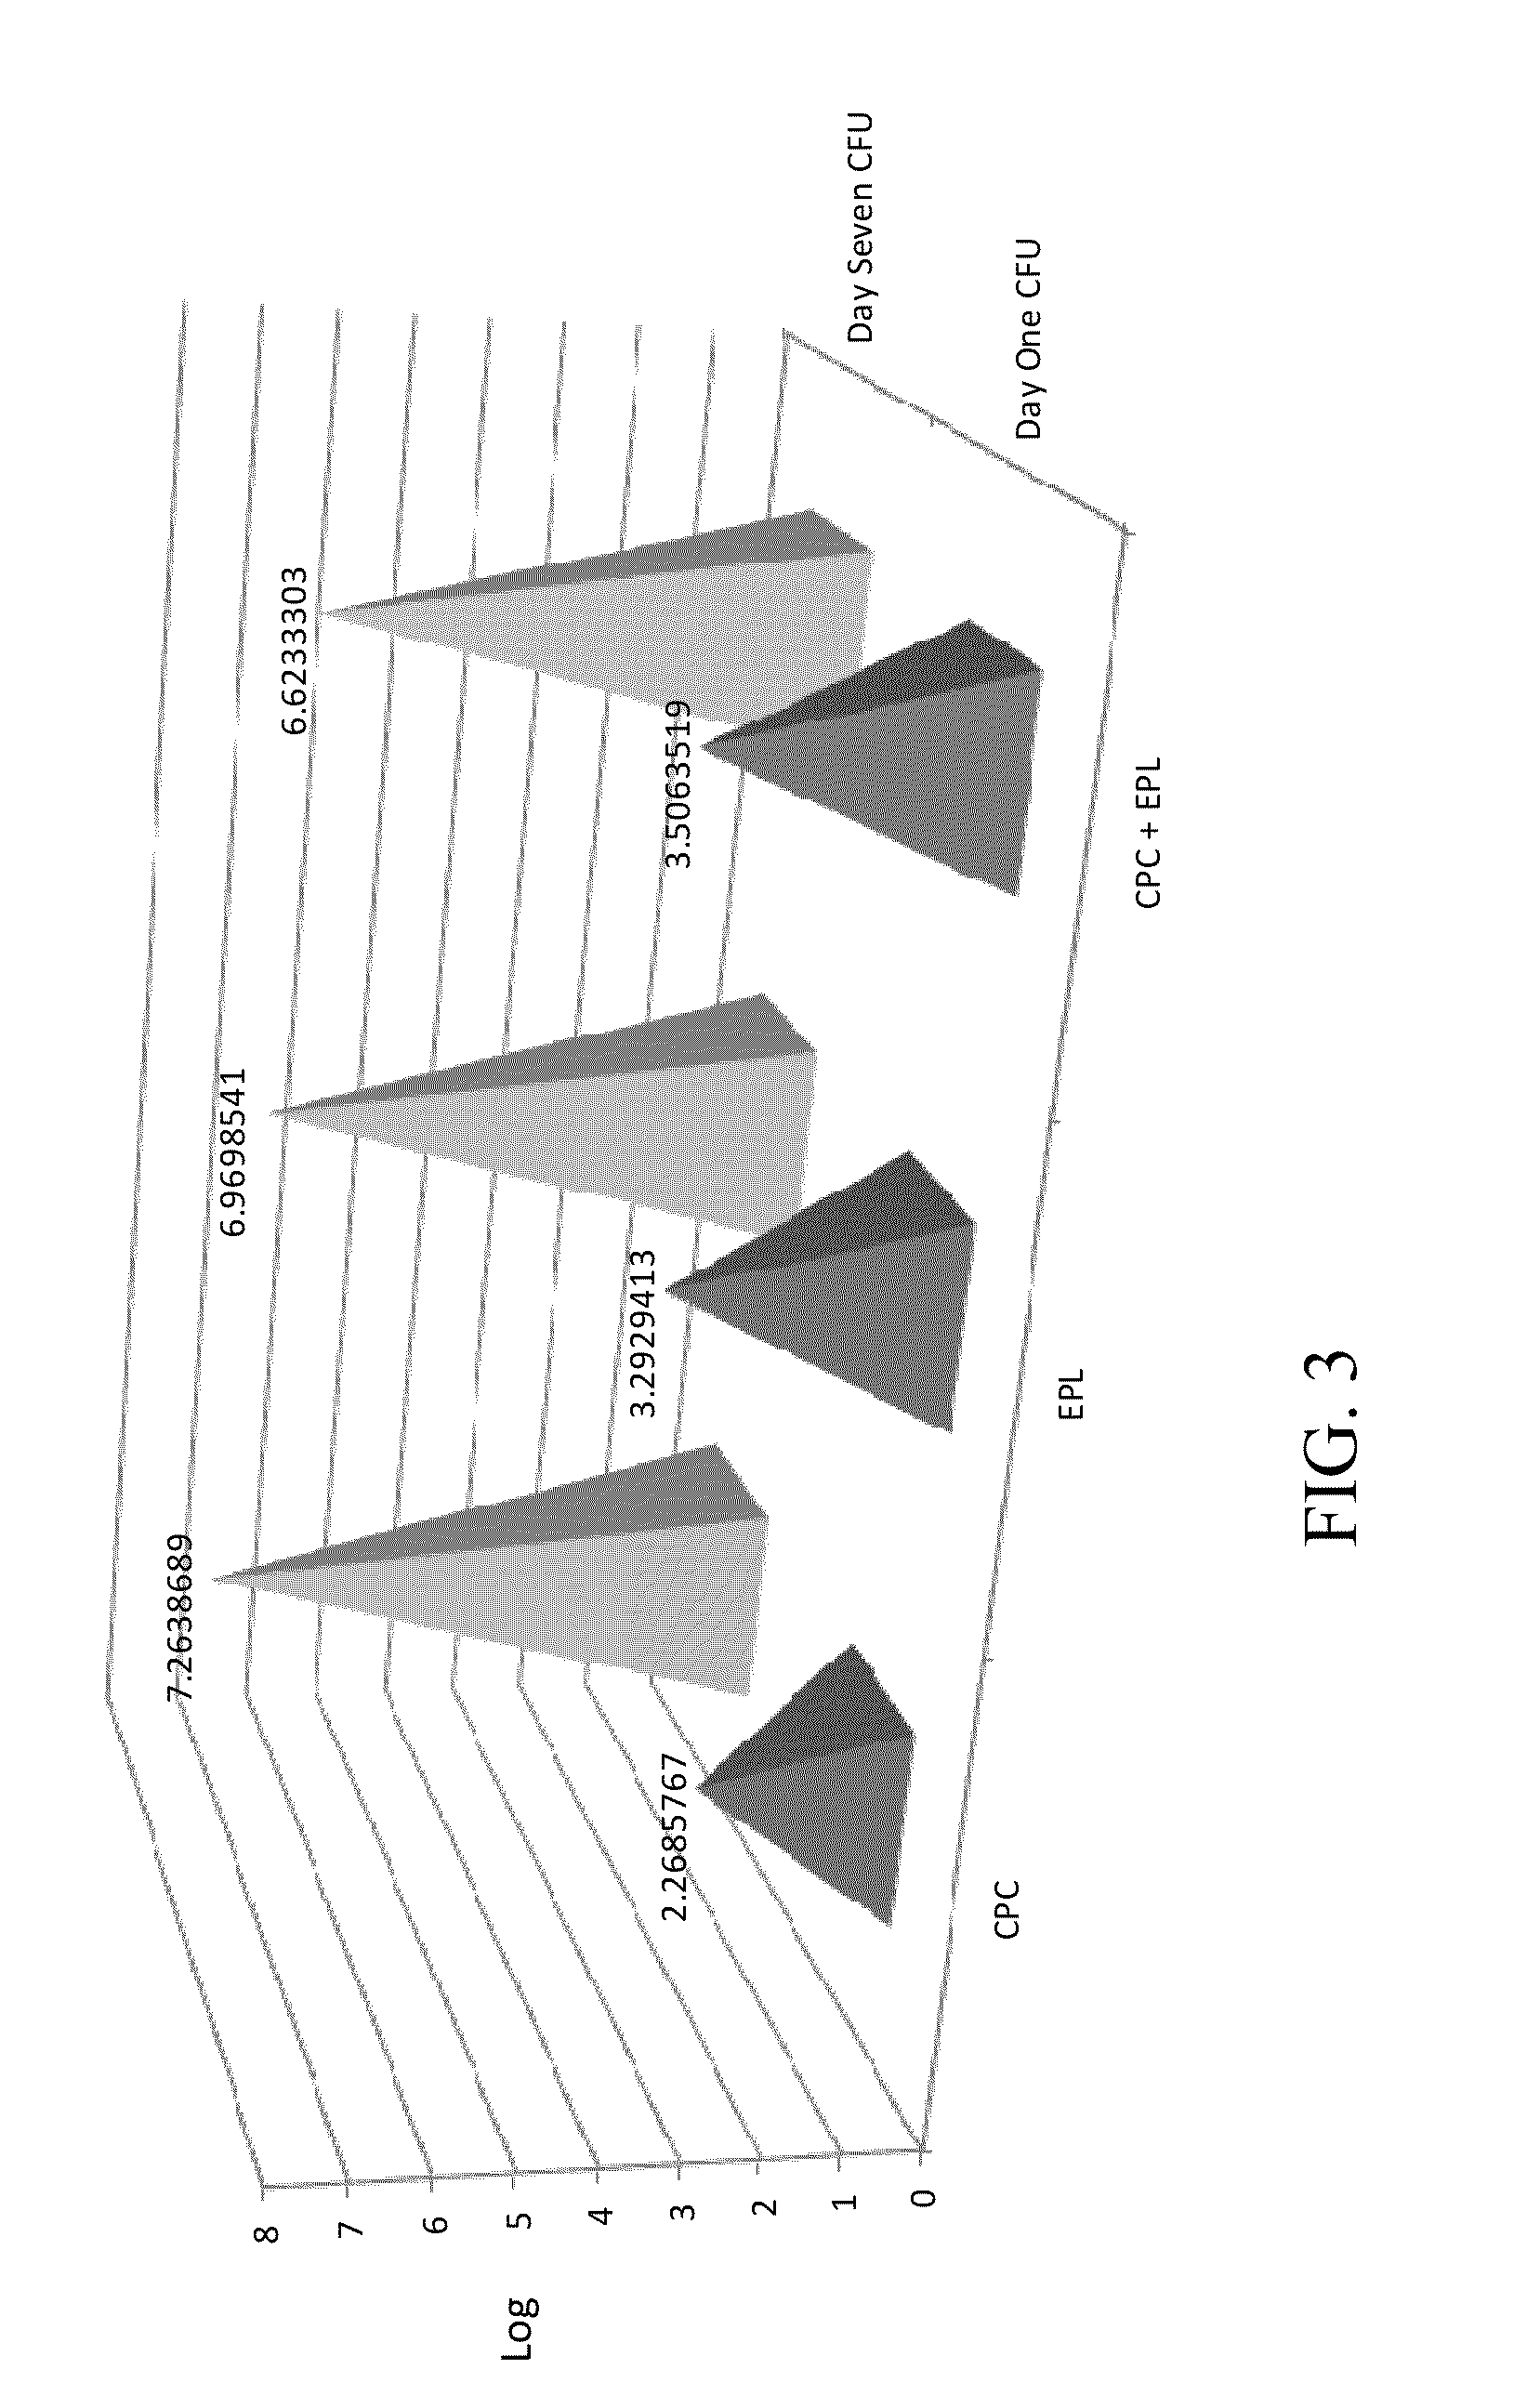 Antimicrobial compositions and methods of use thereof